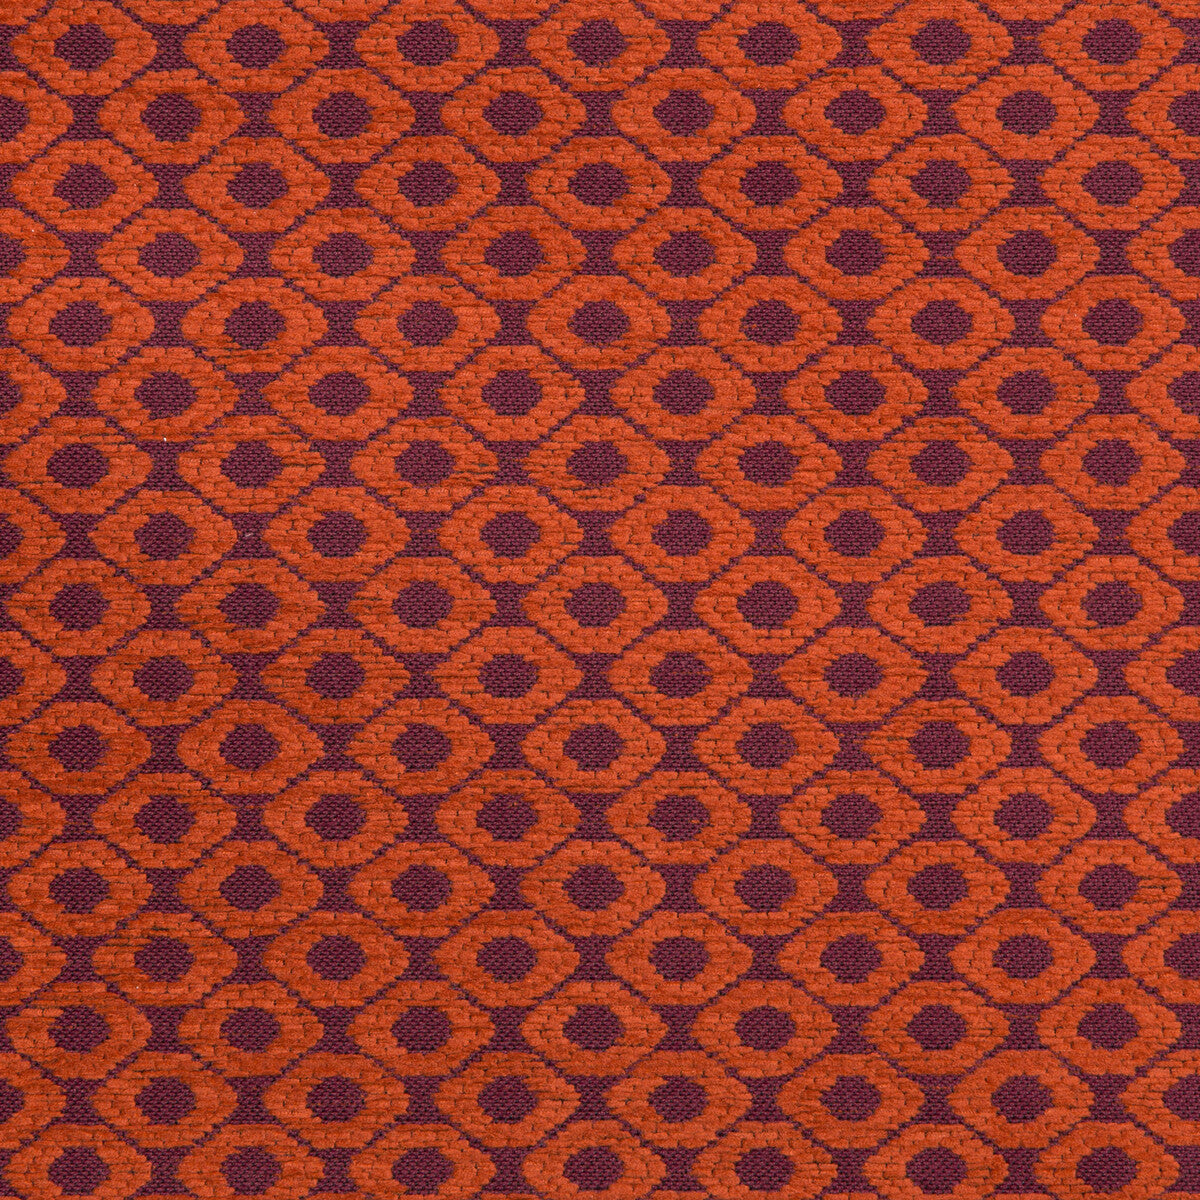 Pave The Way fabric in morocco color - pattern 35867.924.0 - by Kravet Contract in the Gis Crypton collection